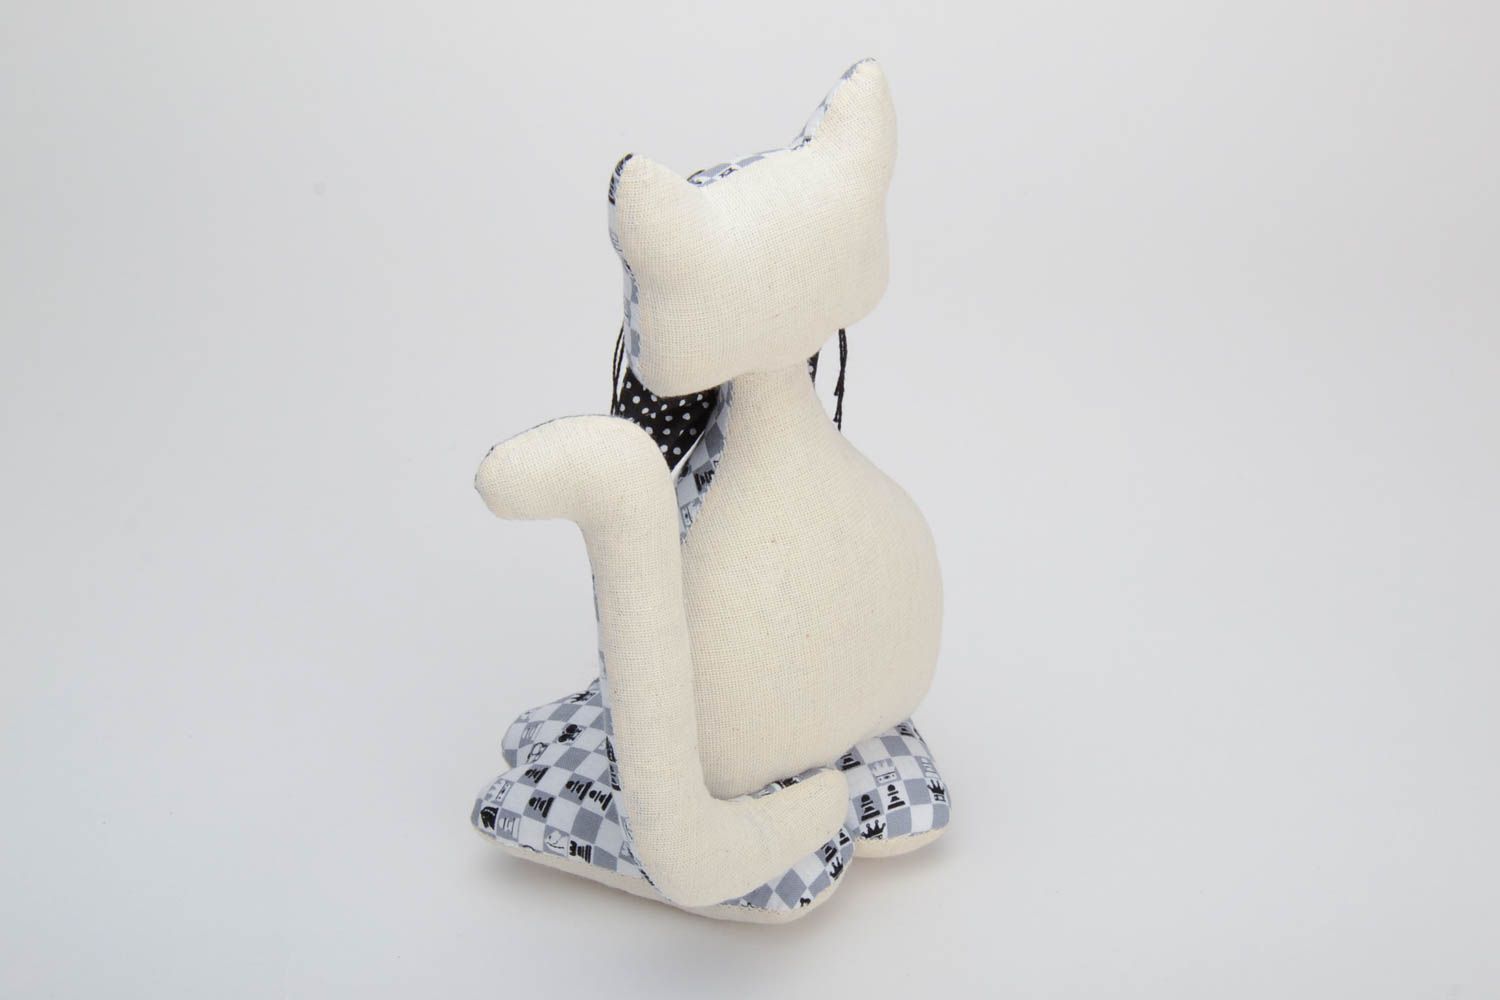 Handmade designer black and white cotton soft toy cat with polka dot bow tie photo 4